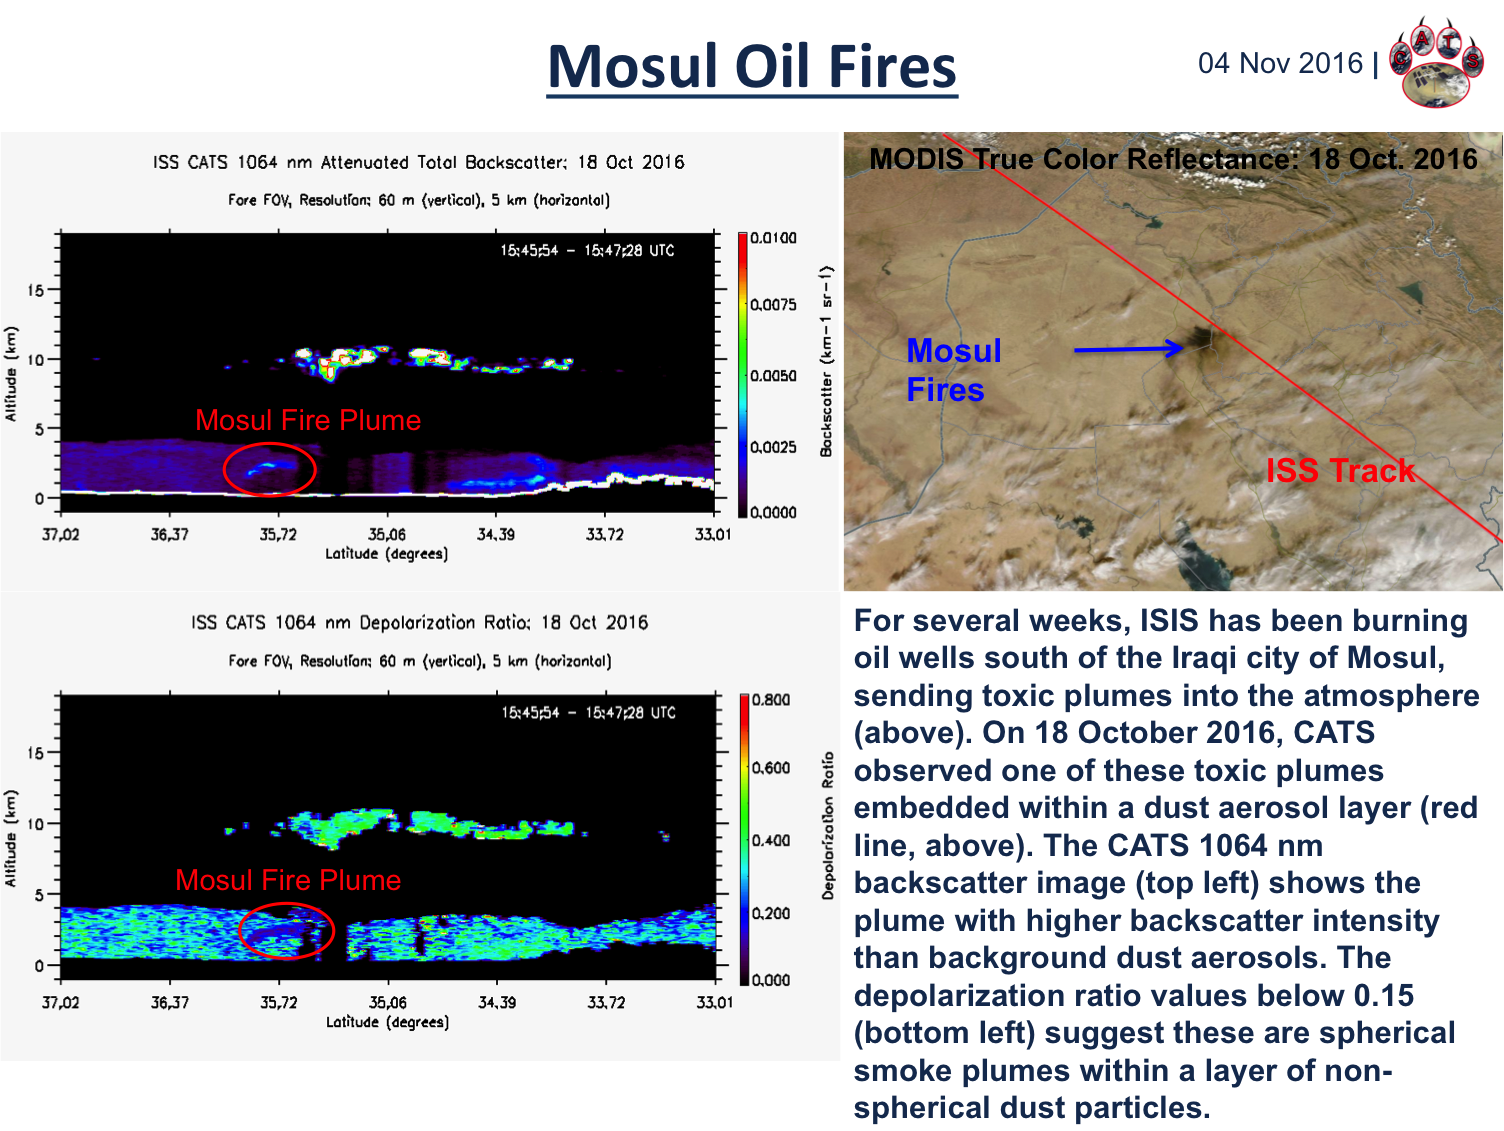 Mosul Oil Fires